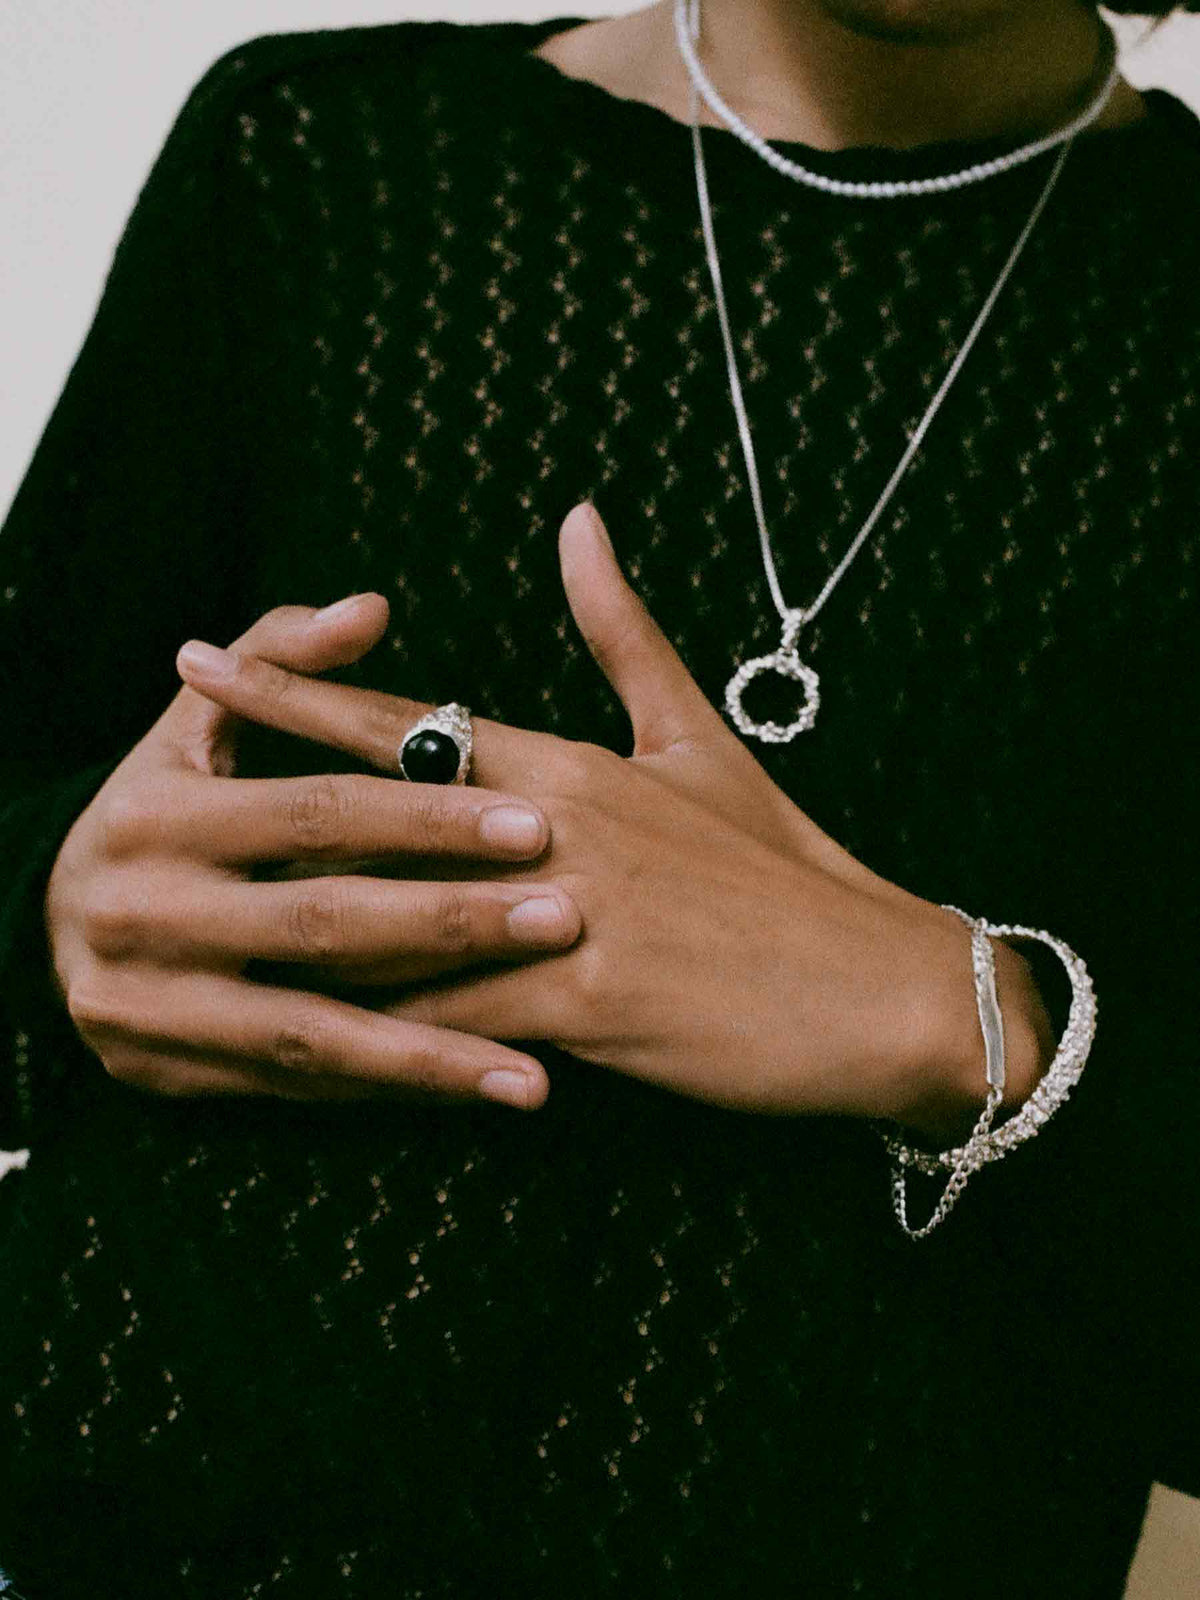 FARIS ROCA BAM Ring in sterling silver and onyx shown on model, styled with ROCA LOOP Necklace in sterling silver, SEED Necklace in 14k with white pearls, ROCA TAG Bracelet in sterling silver, and ROCA Cuff in sterling silver